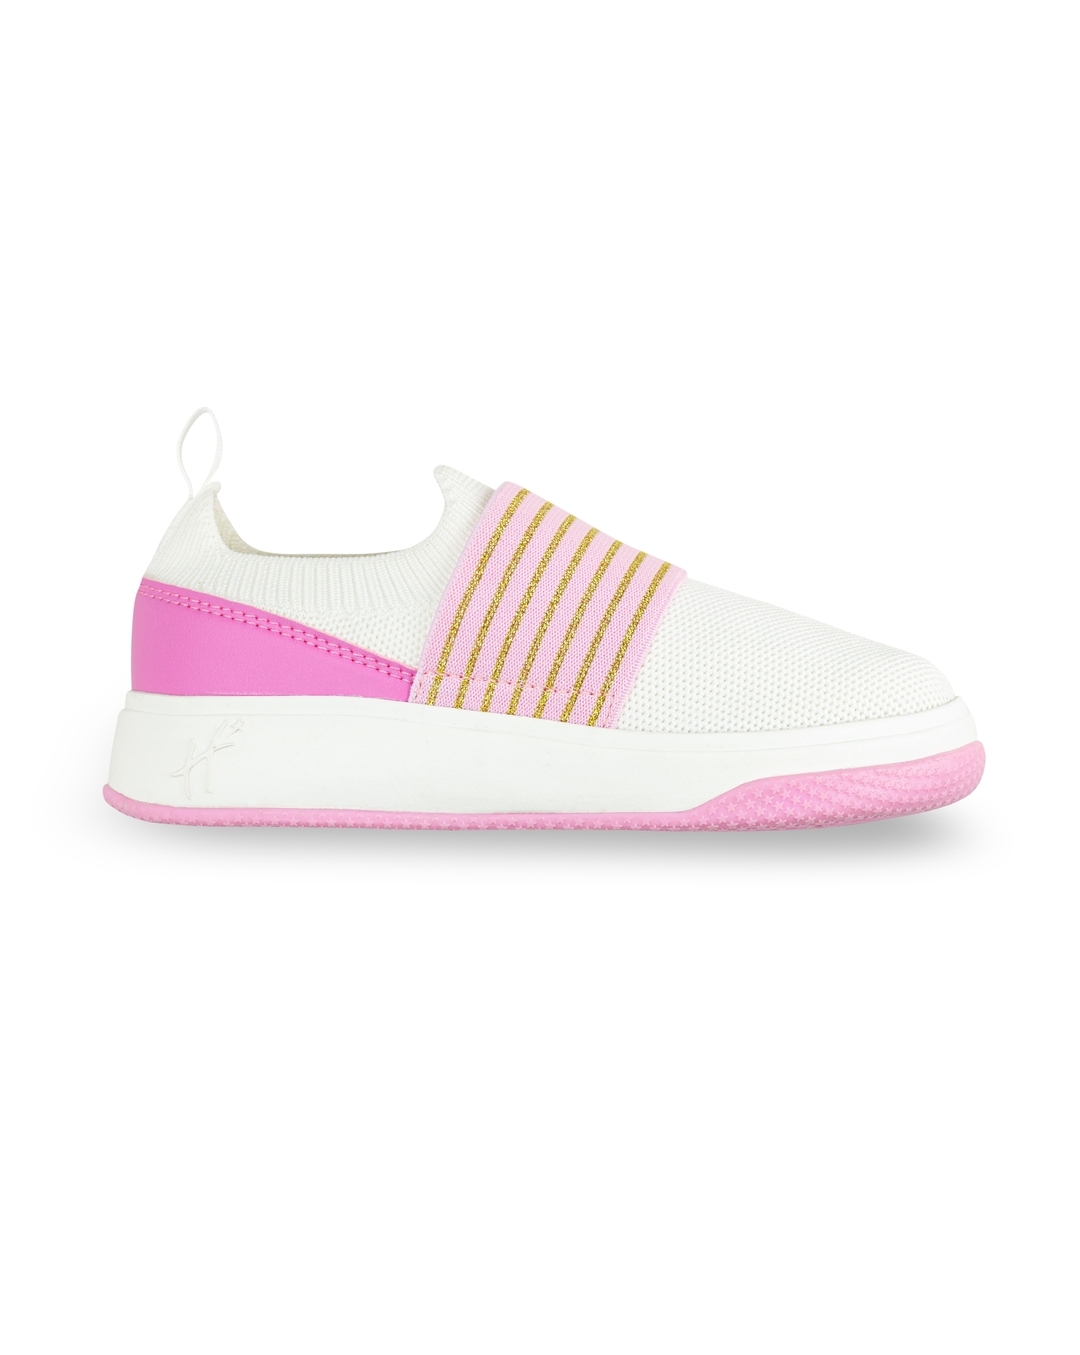 Shoes By Liv And Mia | Girls Sequin Casual Sneakers - Mia Belle Girls